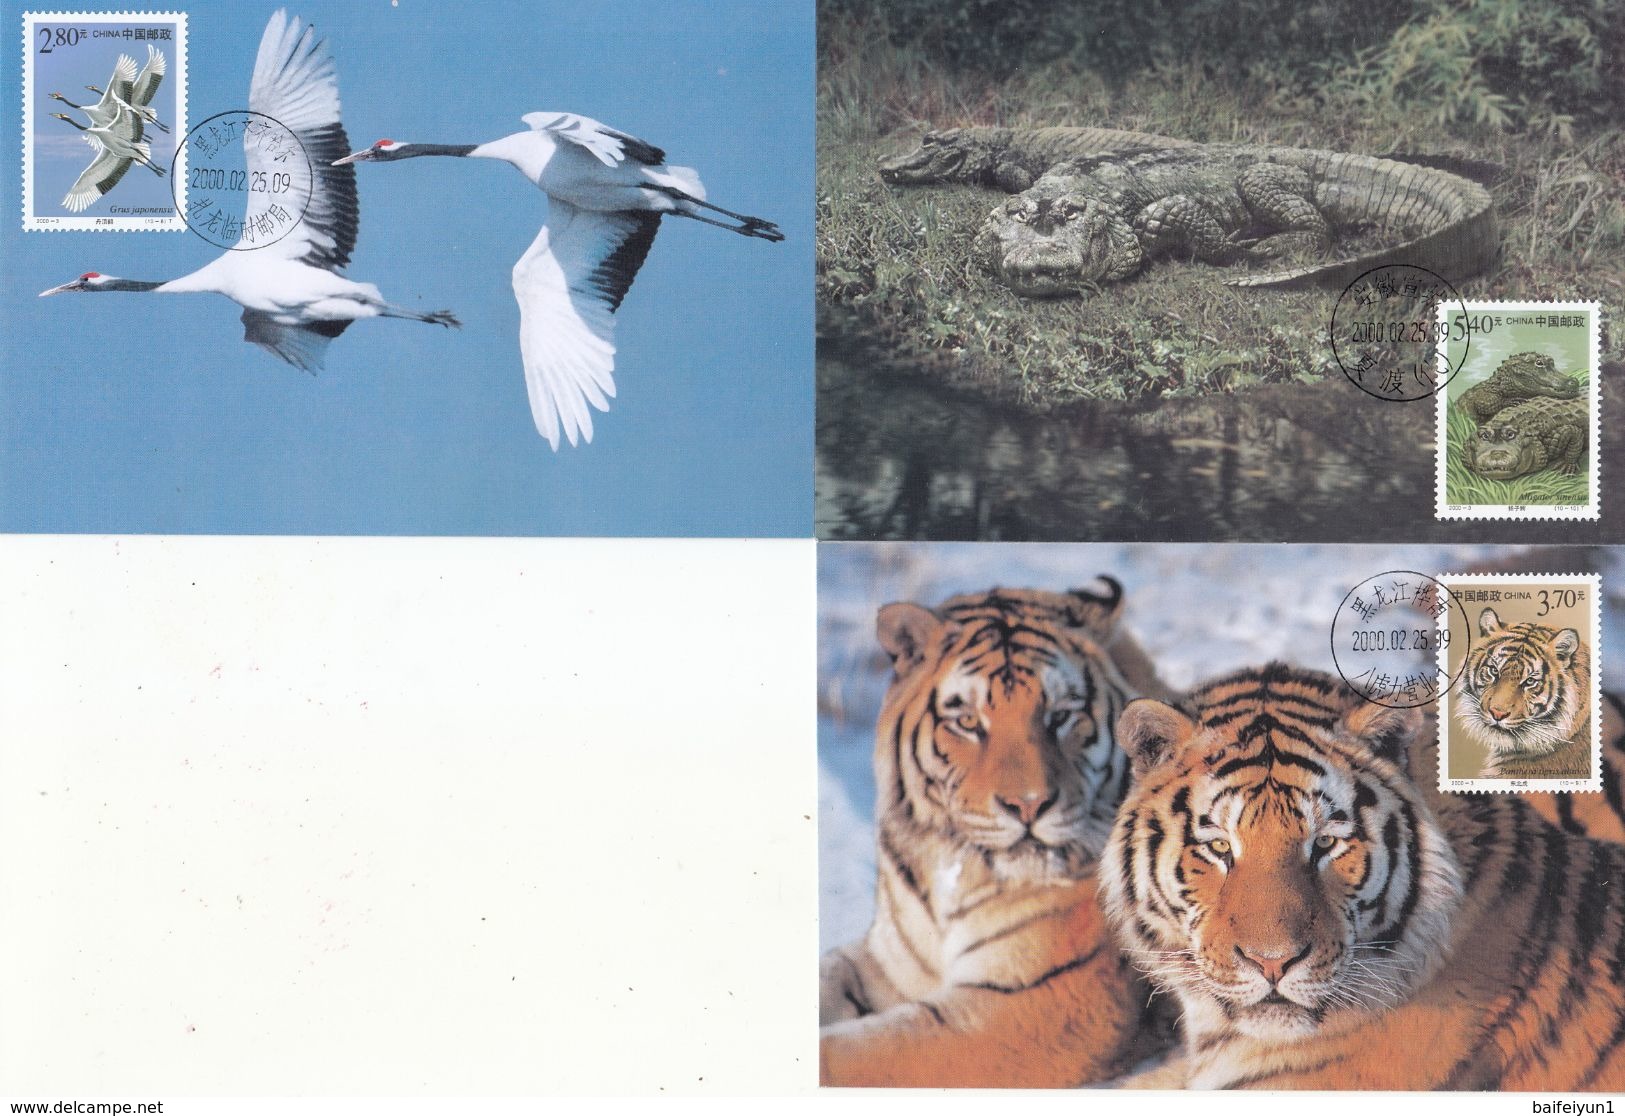 China 2000-3  MC-40 1st Class Wildlife Protection stamps Maxcards